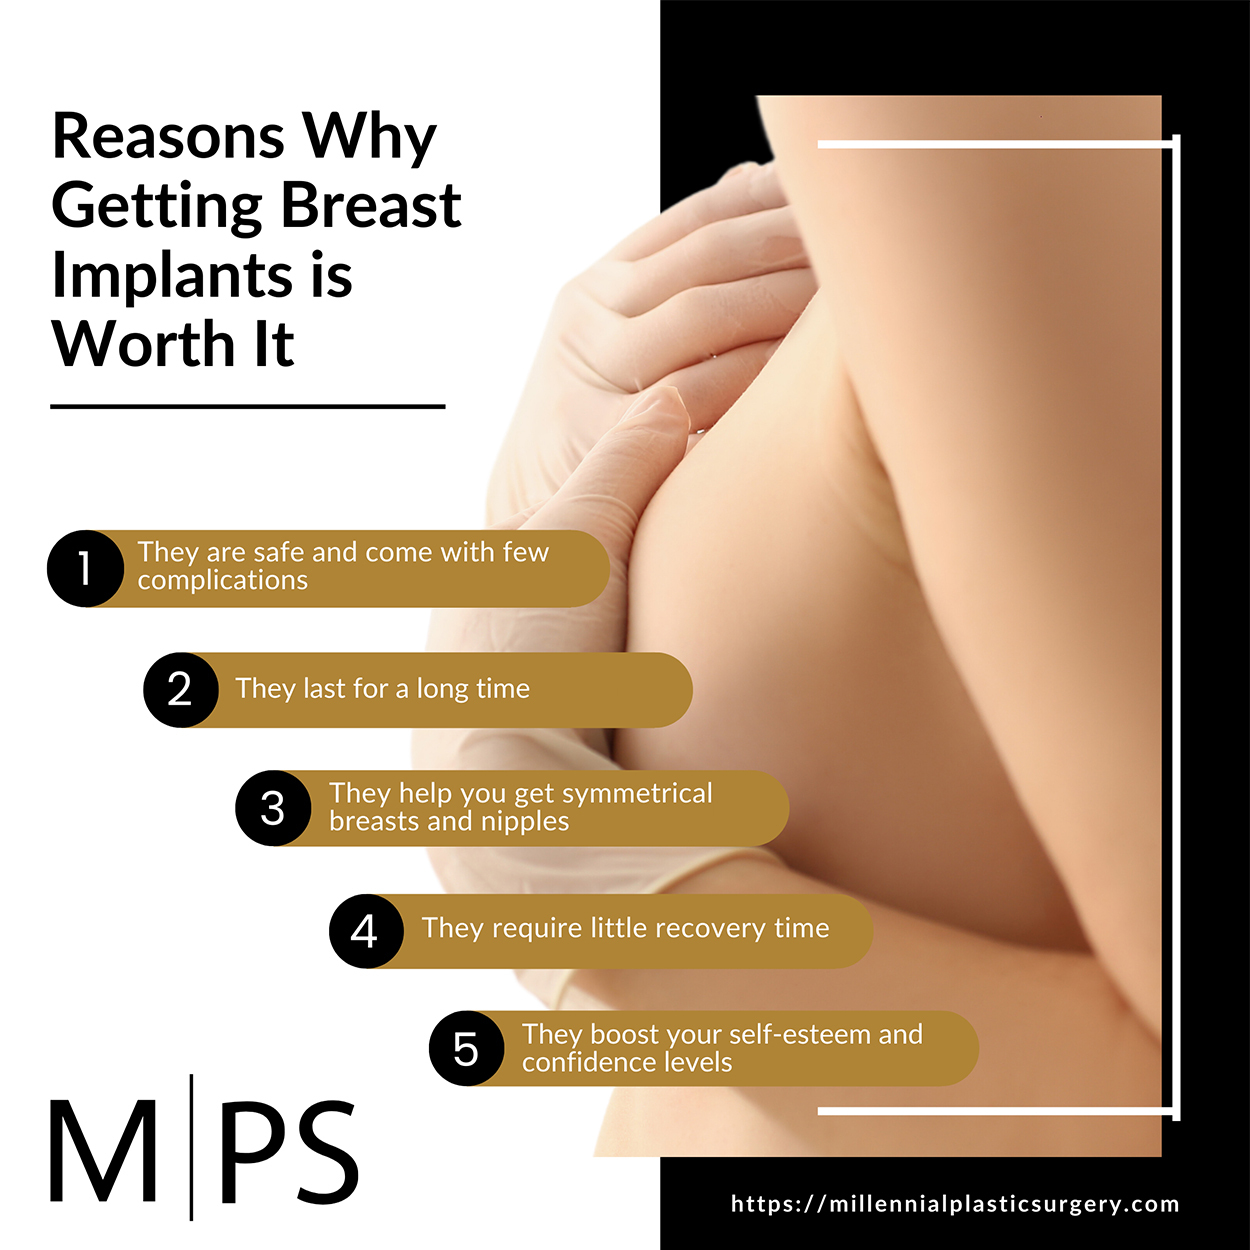 Reasons Why Getting Breast Implants is Worth It banner